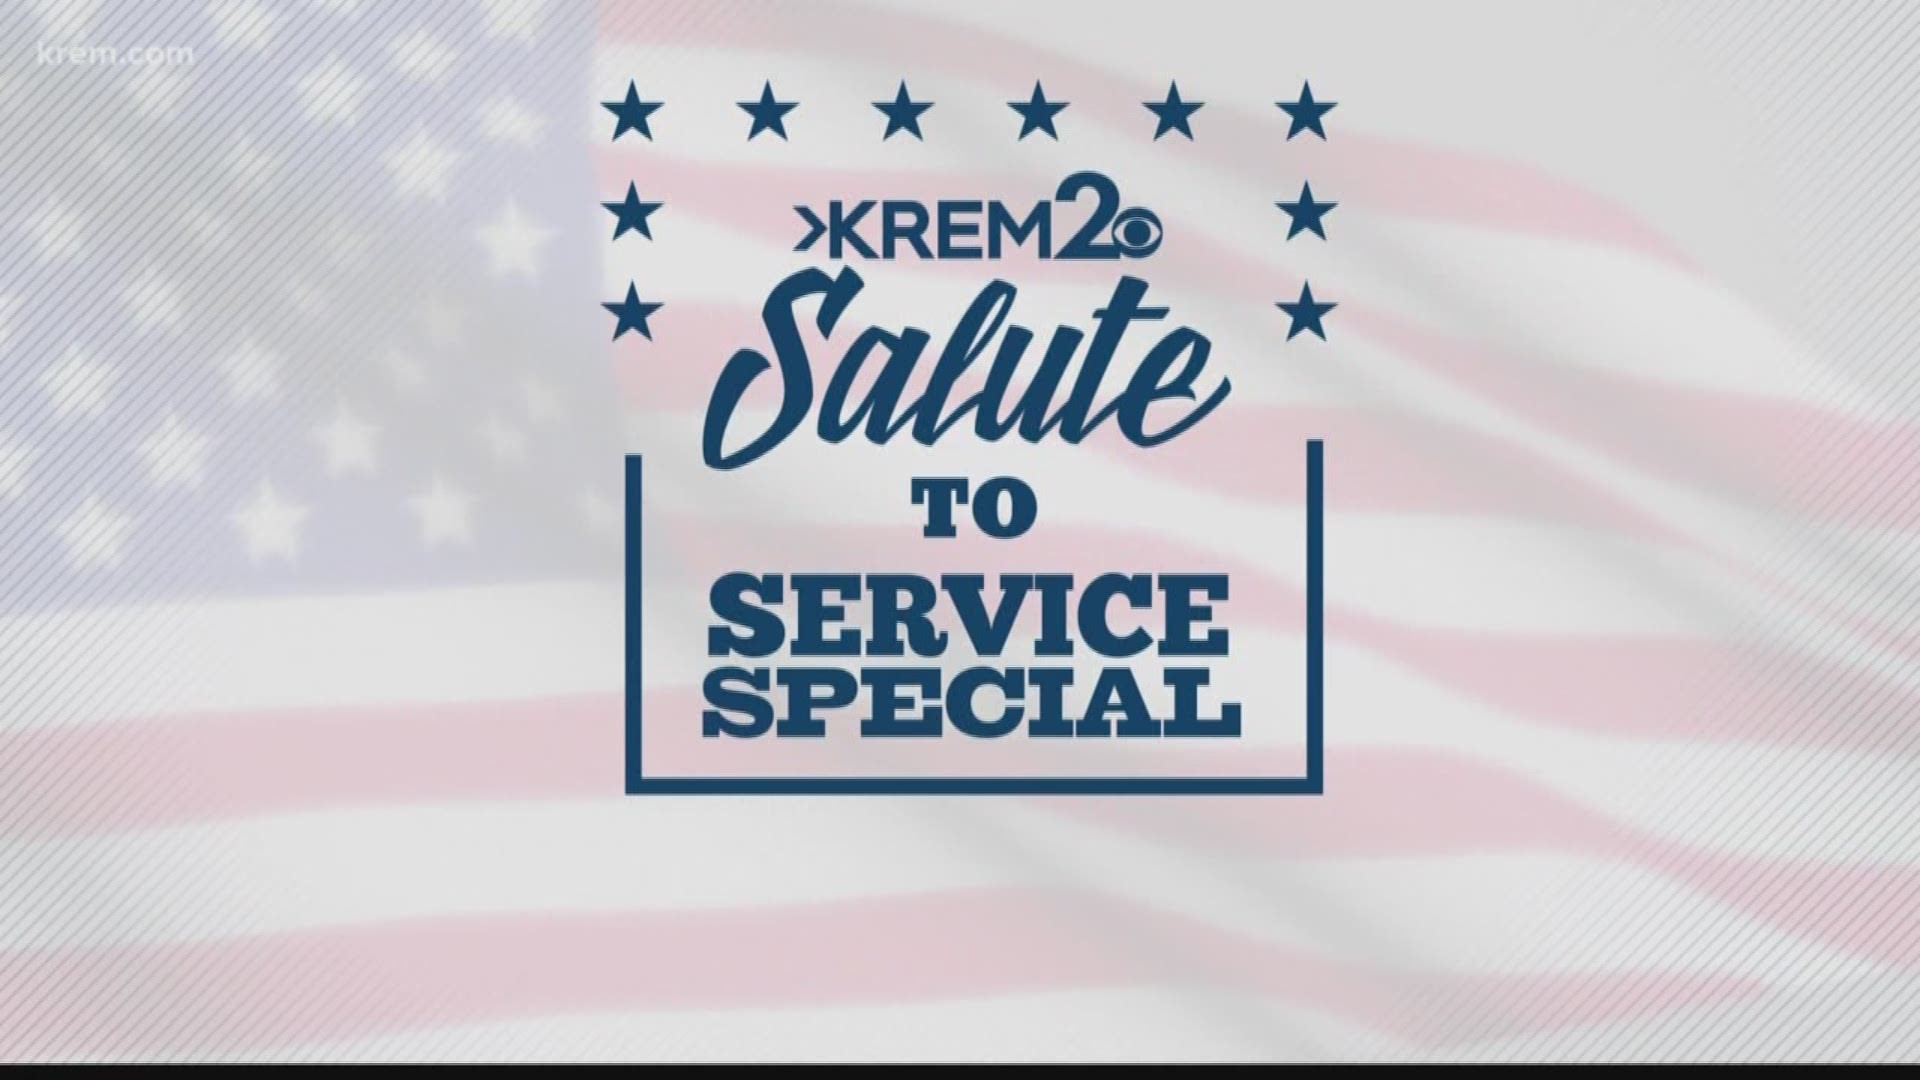 Watch KREM's Salute to Service Special from Riverpark Square, hosted by KREM's Laura Papetti.